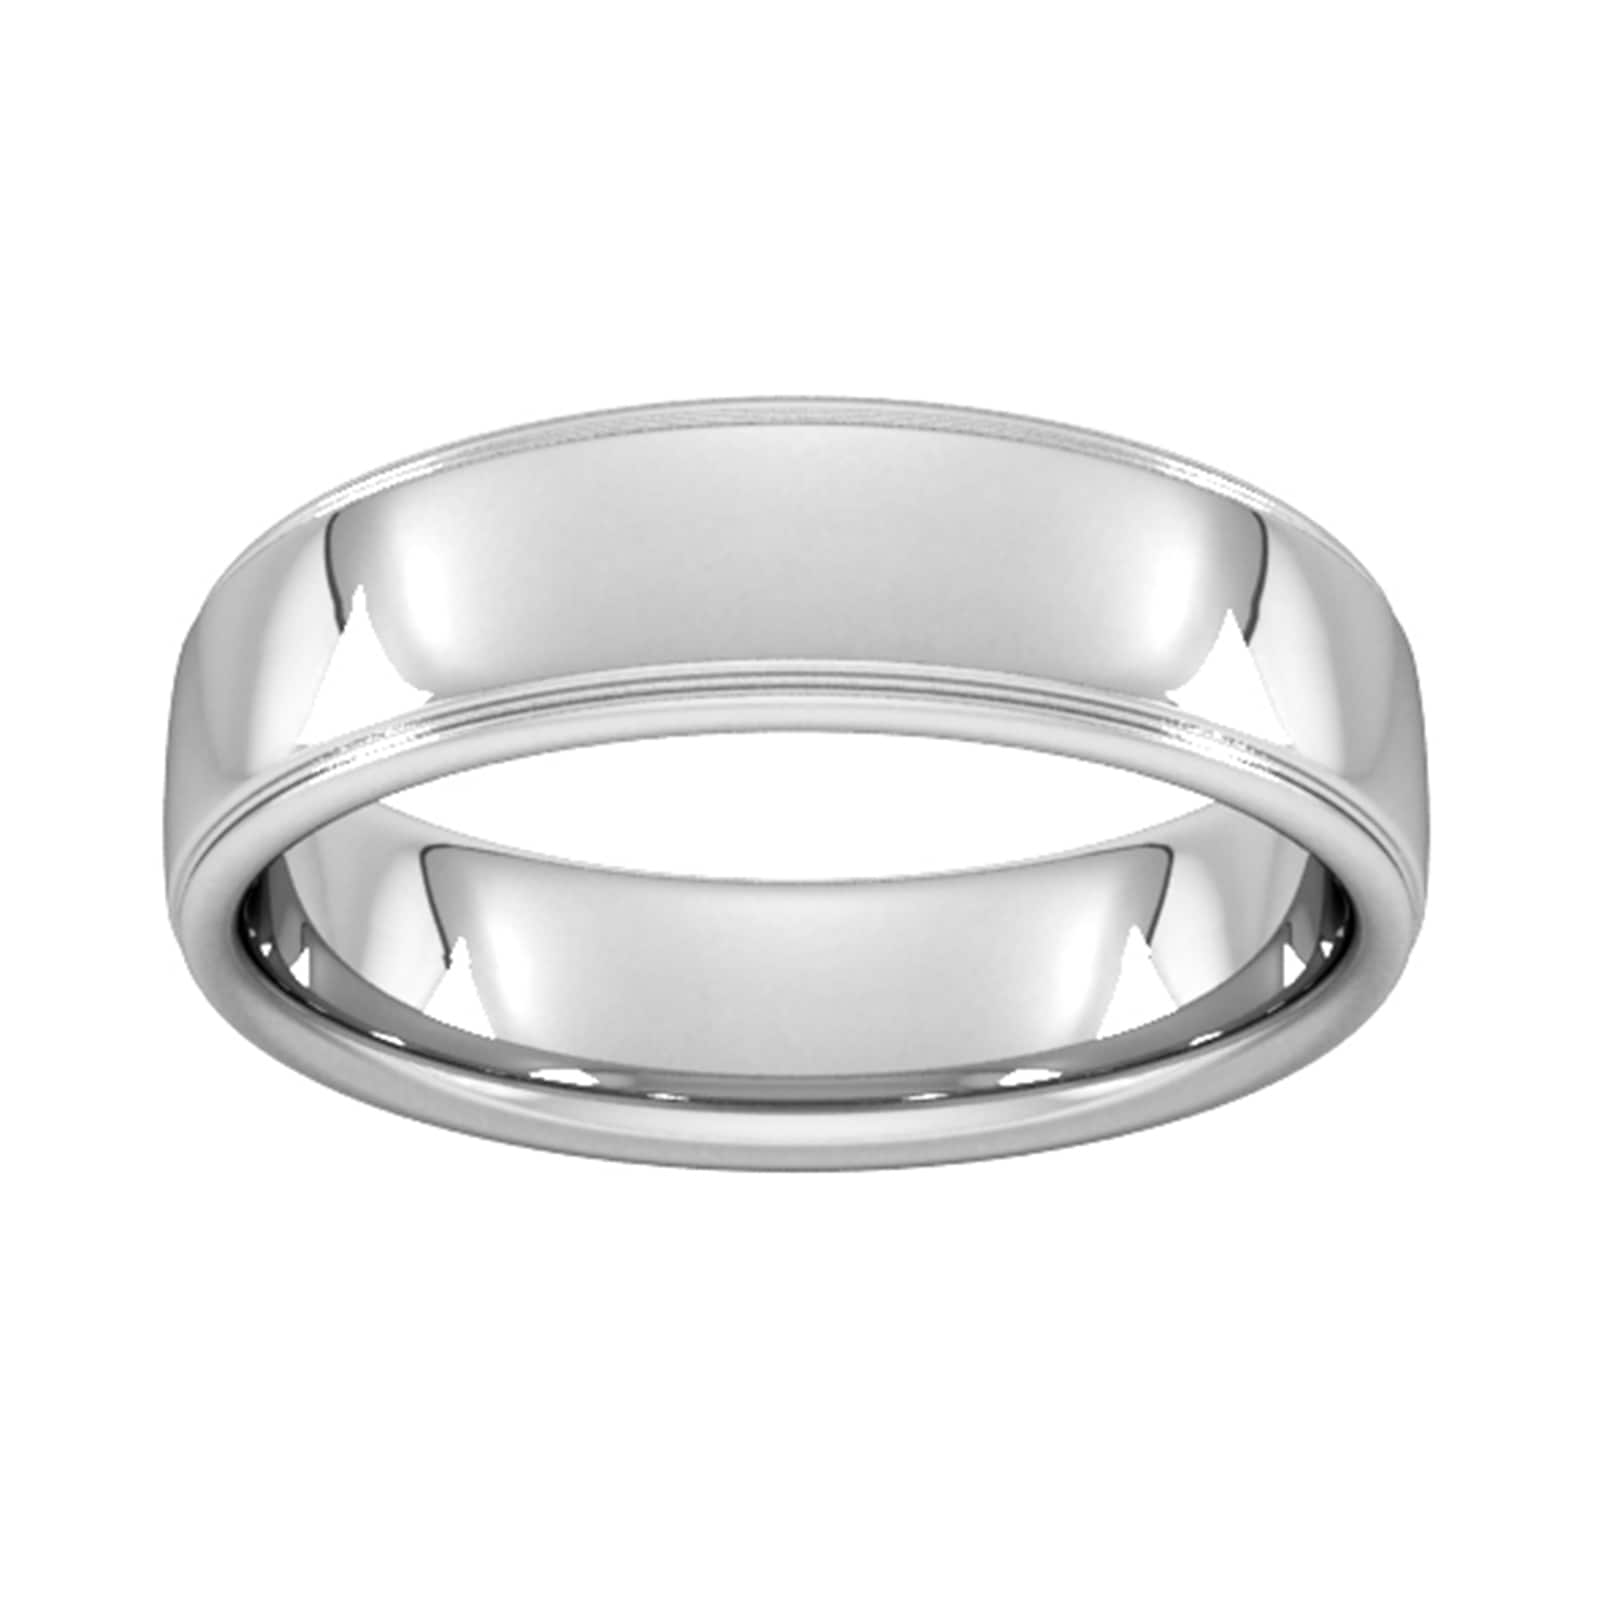 6mm D Shape Heavy Polished Finish With Grooves Wedding Ring In 9 Carat White Gold - Ring Size Q